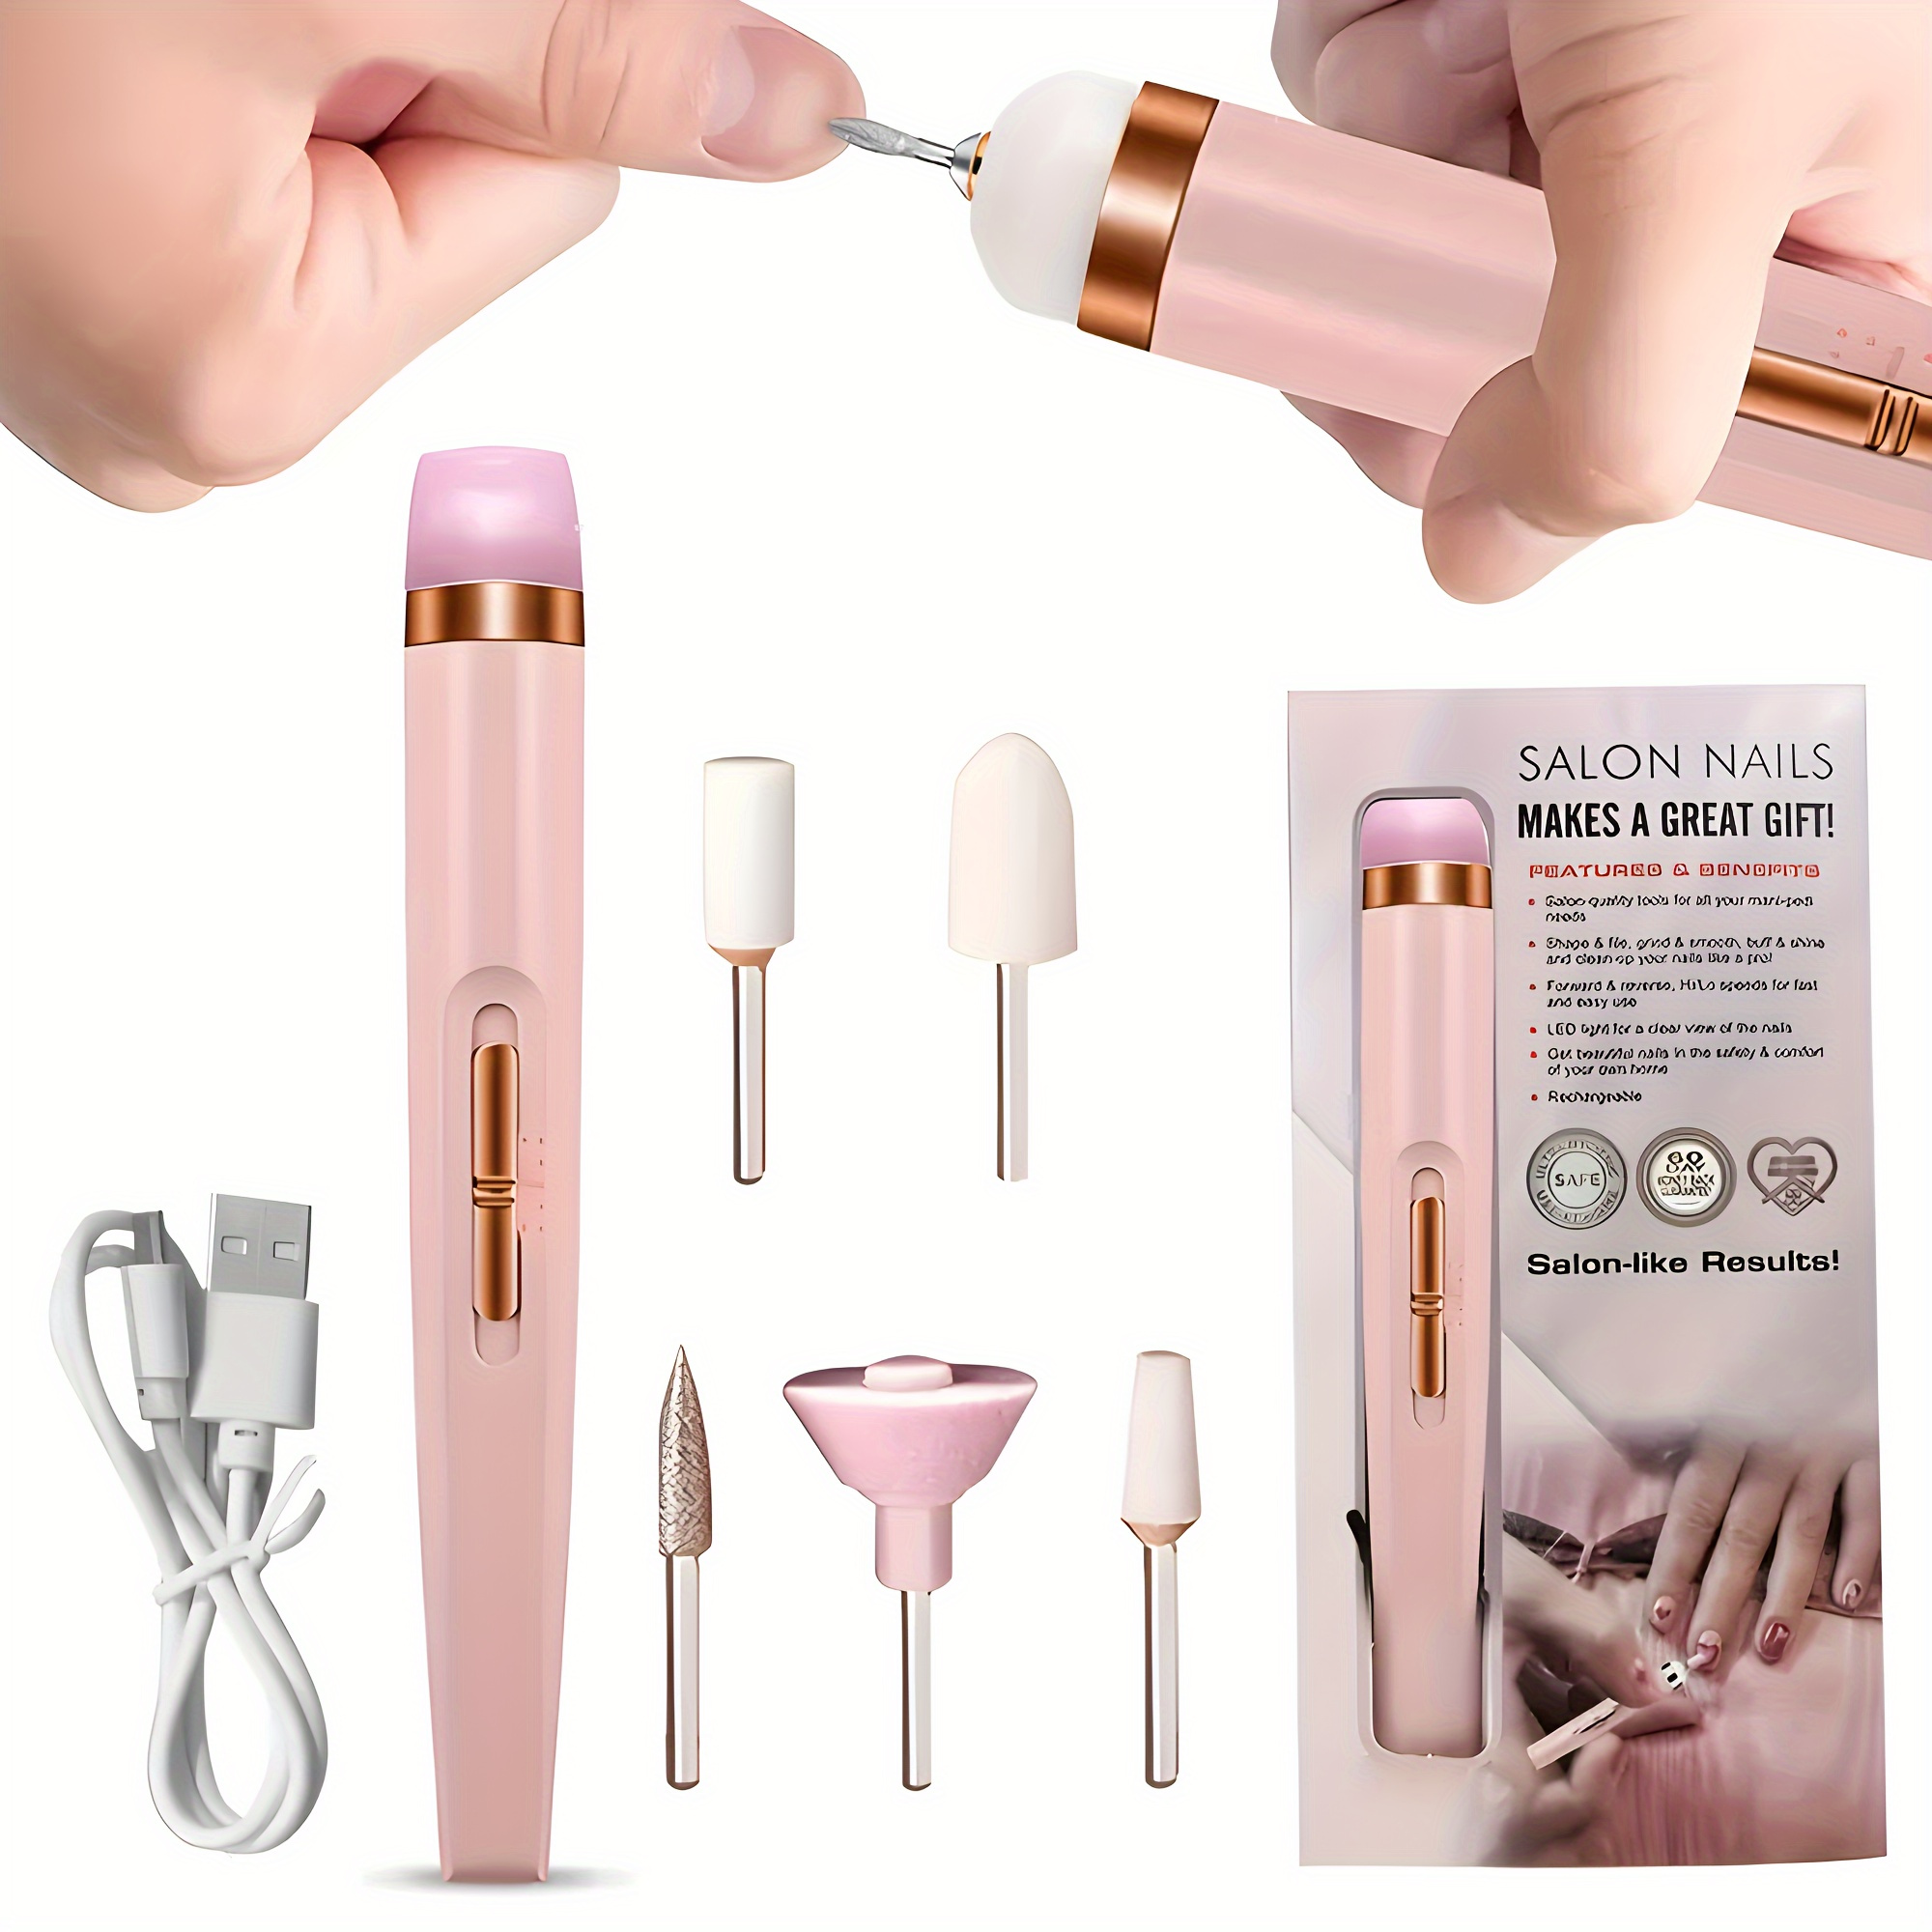 

Portable Mini Electric Nail Files And Drill Kit, Manicure Pedicure Tool With 6 Grinding Heads, Ideal For Home And Salon Use